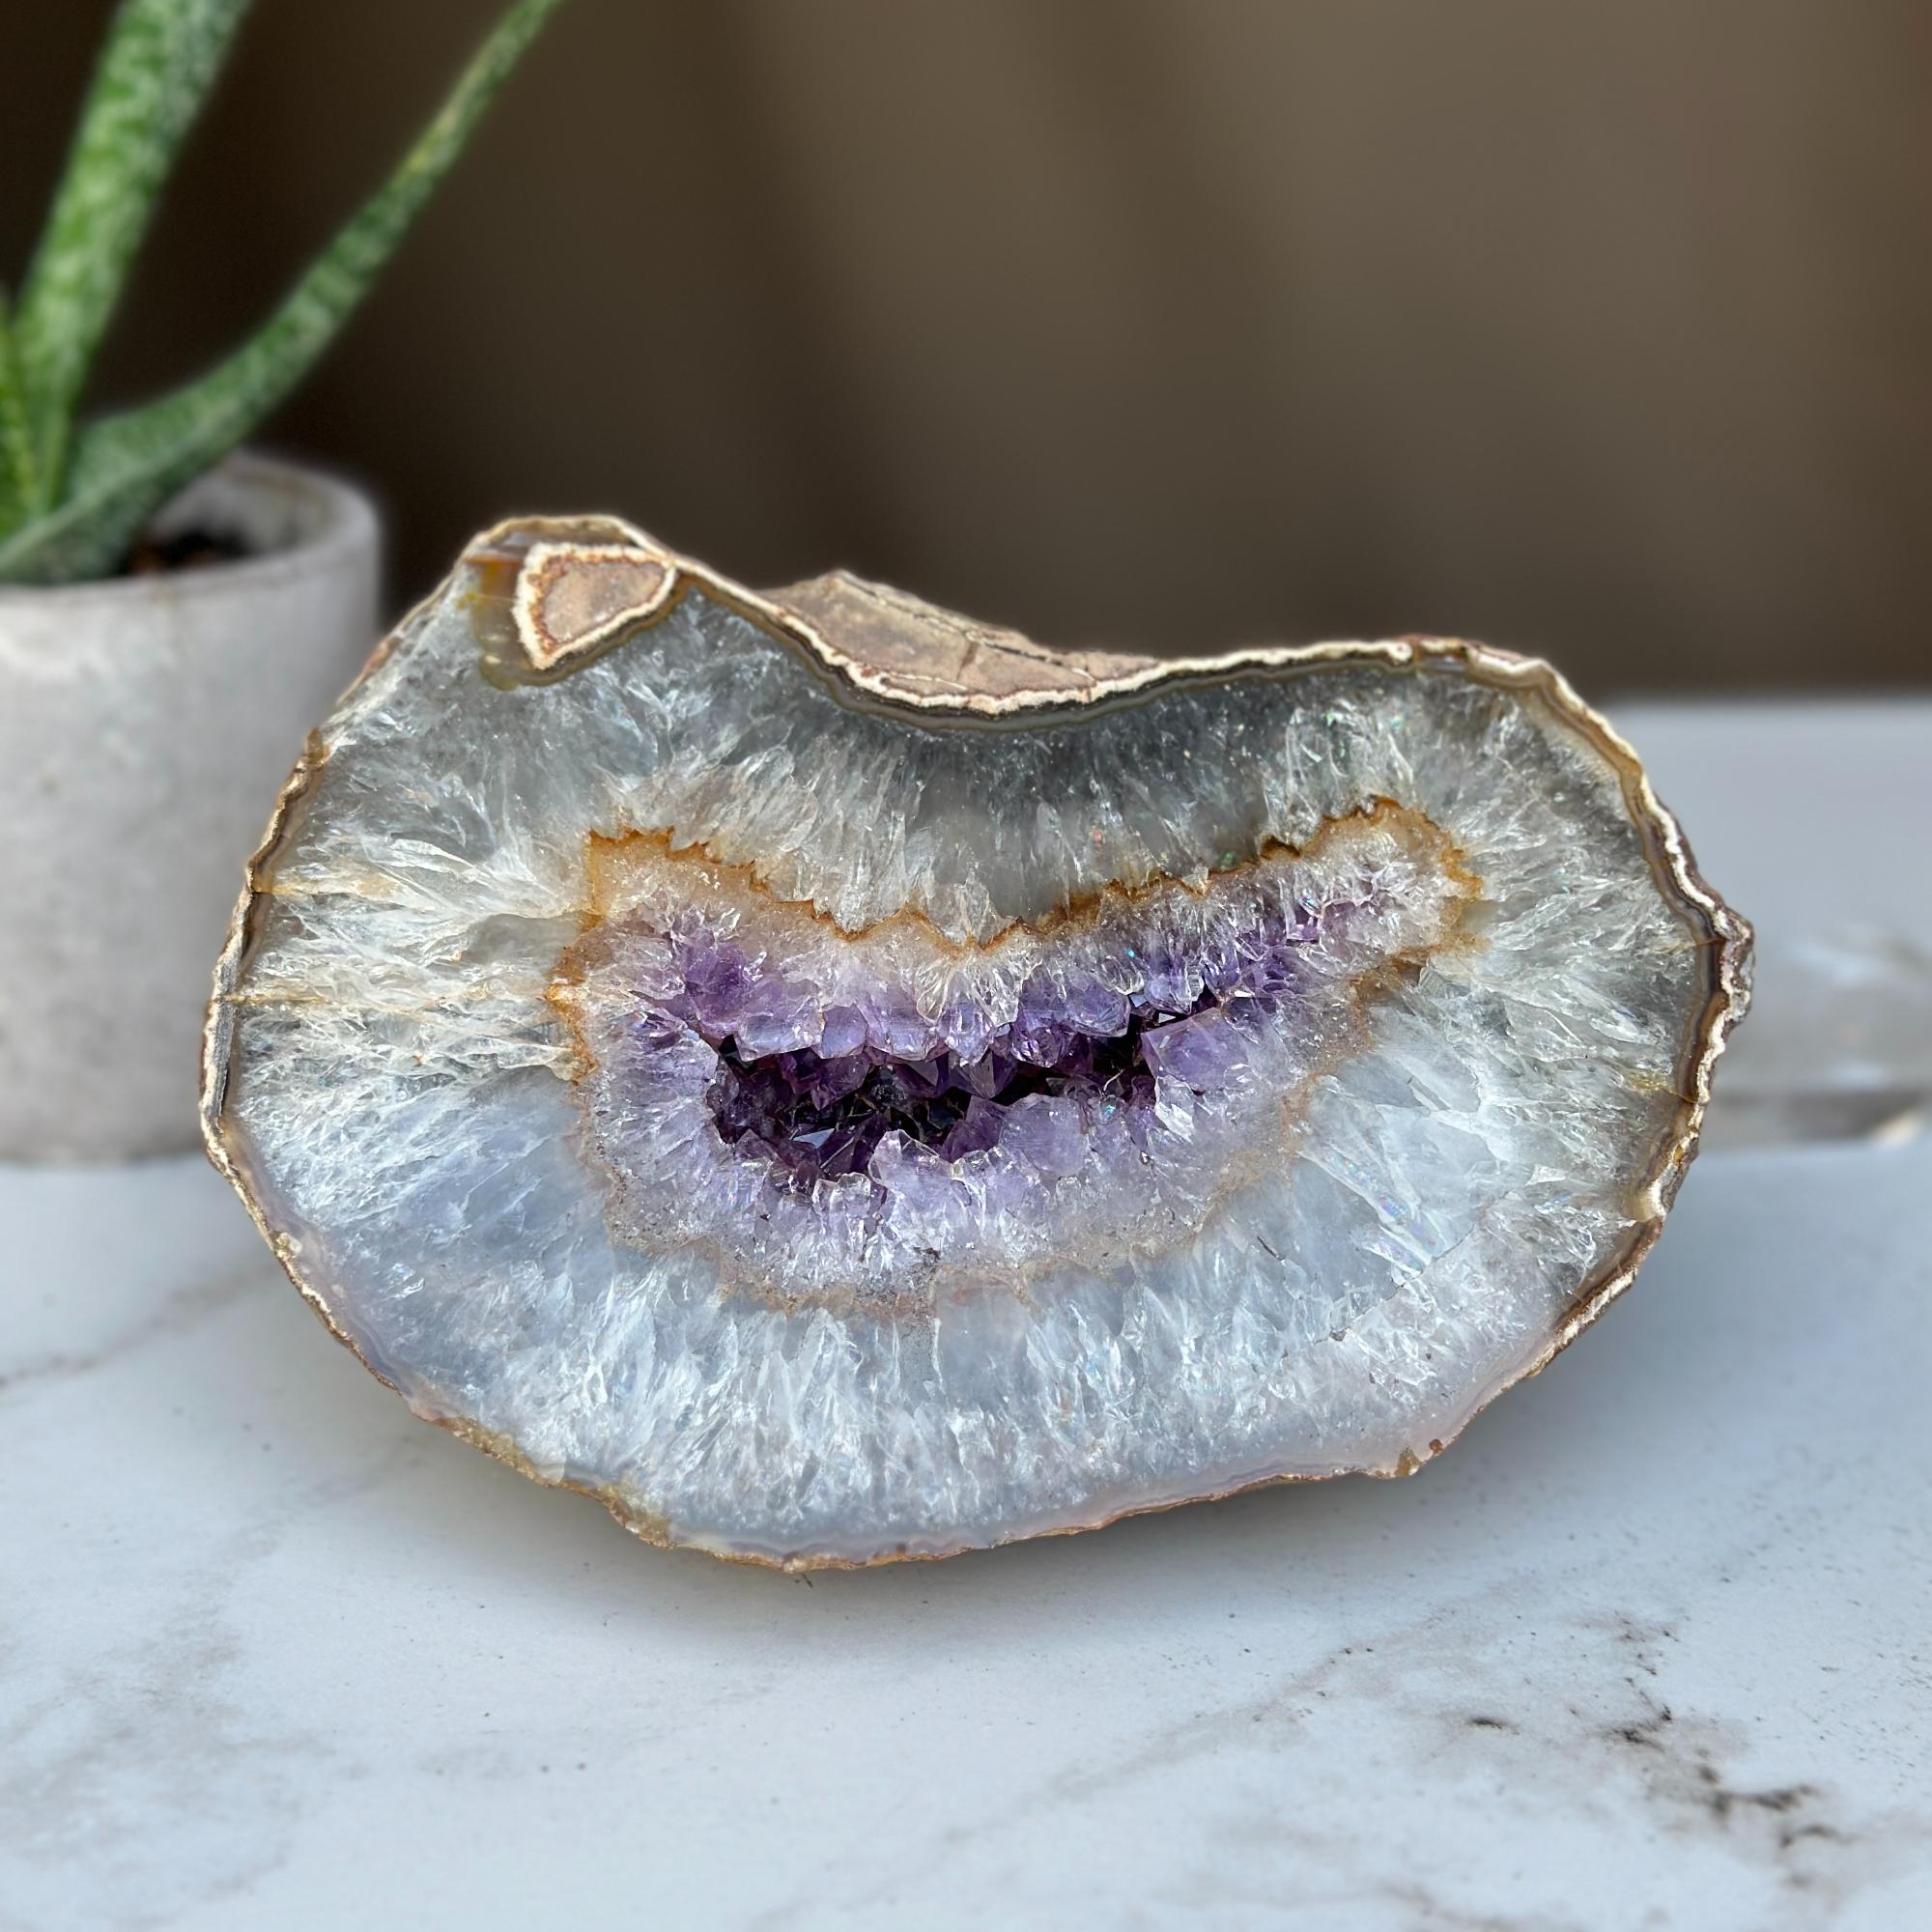 Incredible Amethyst Crystal Cave, Natural Deep Purple Amethyst Geode Oval Shaped Cluster, Home Decor Crystal Bowl